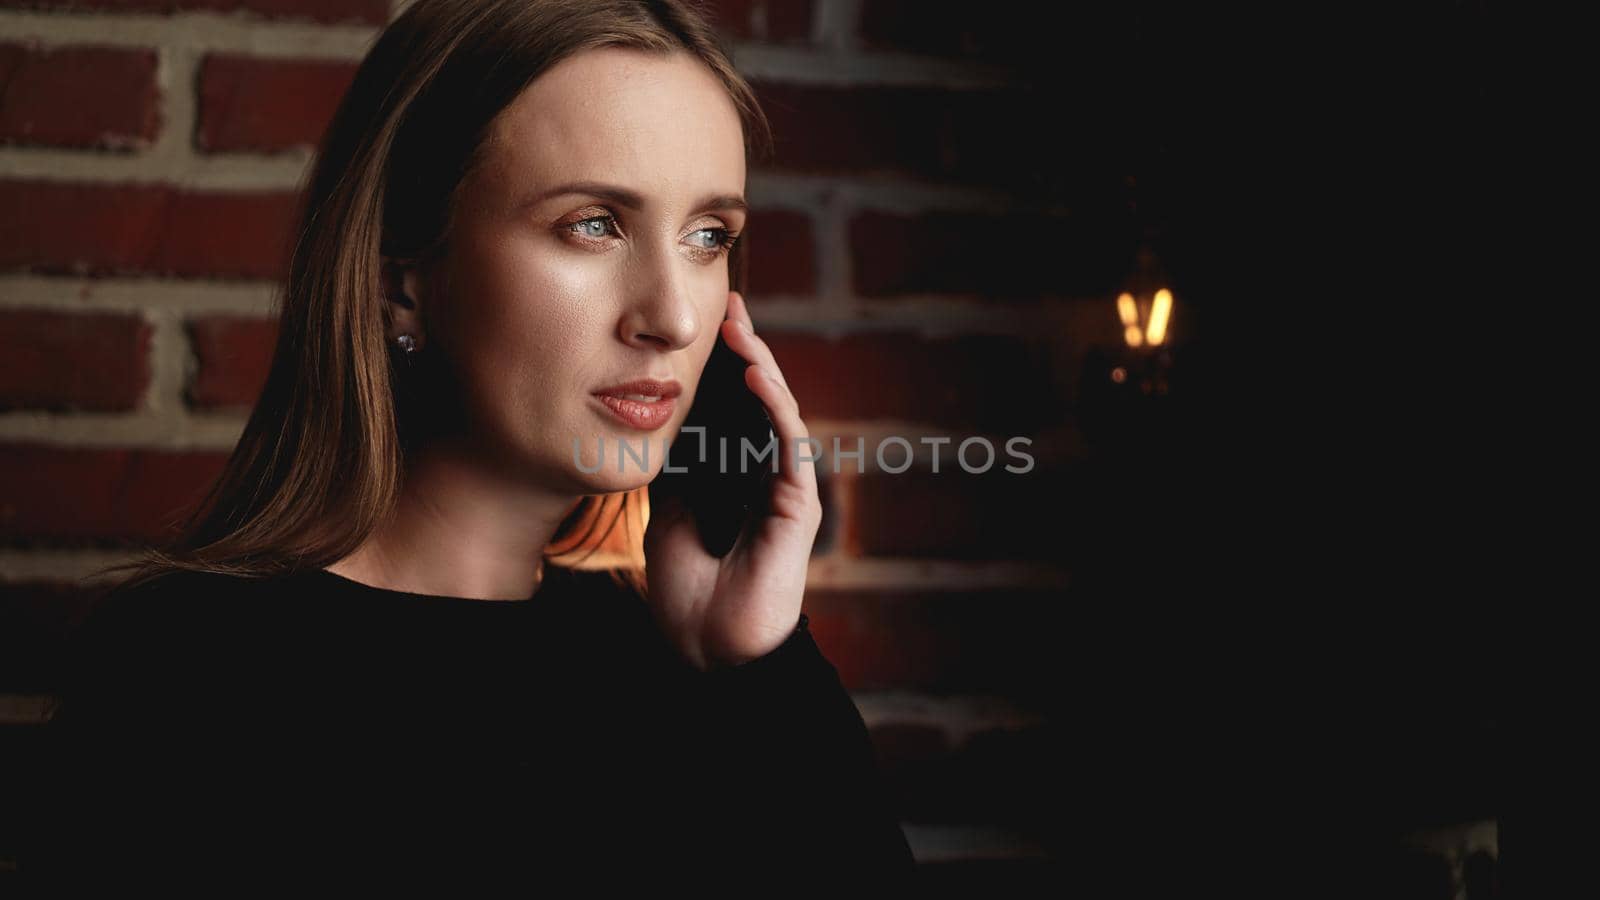 Beautiful serious young woman in black standing against brick wall and using cellphone